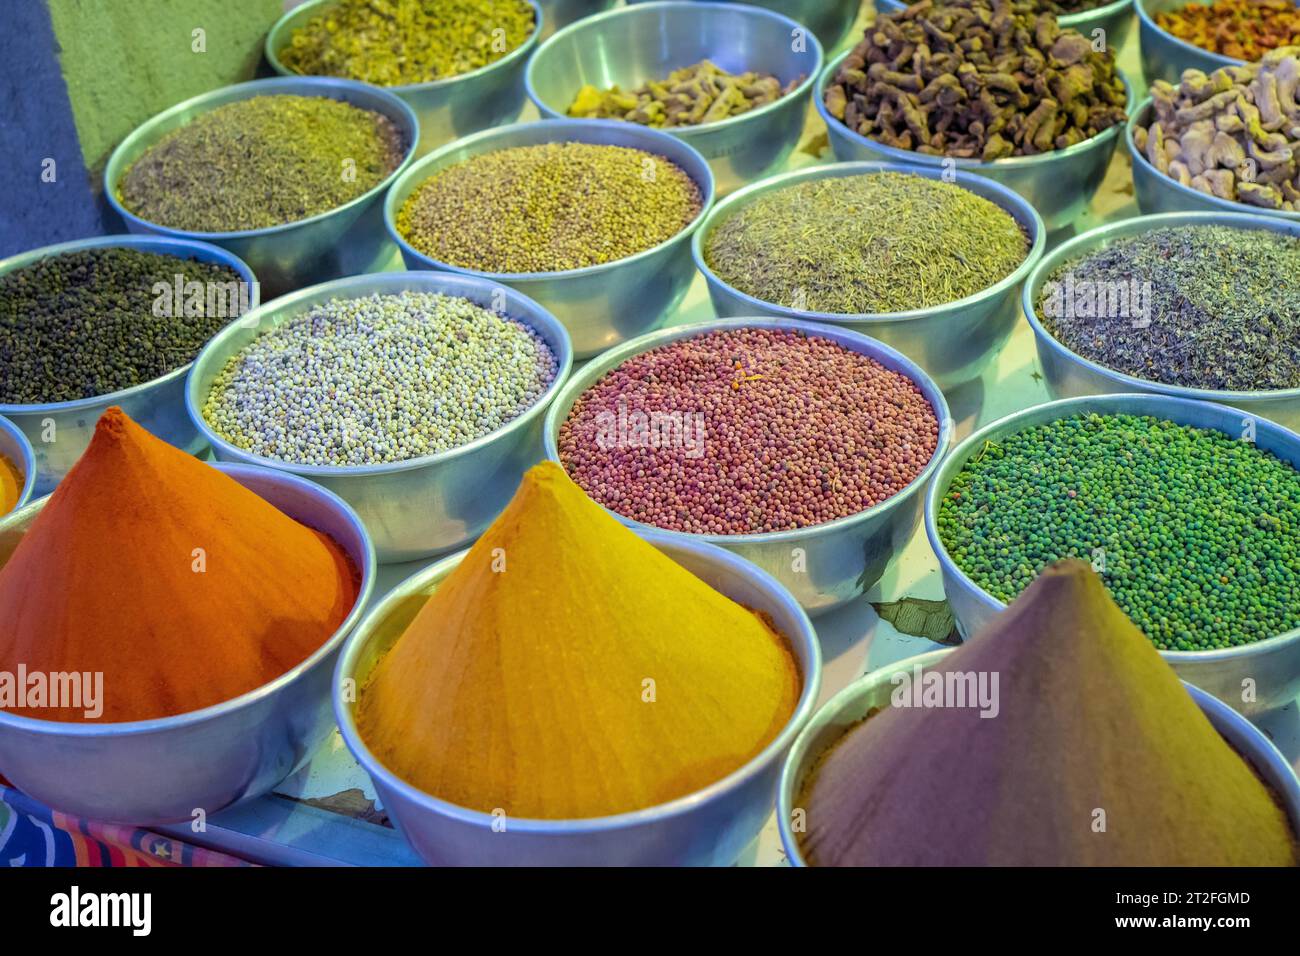 Colorful species market in a bazaar in a Nubian village along the Nile river and near the city Aswan. Egypt Stock Photo